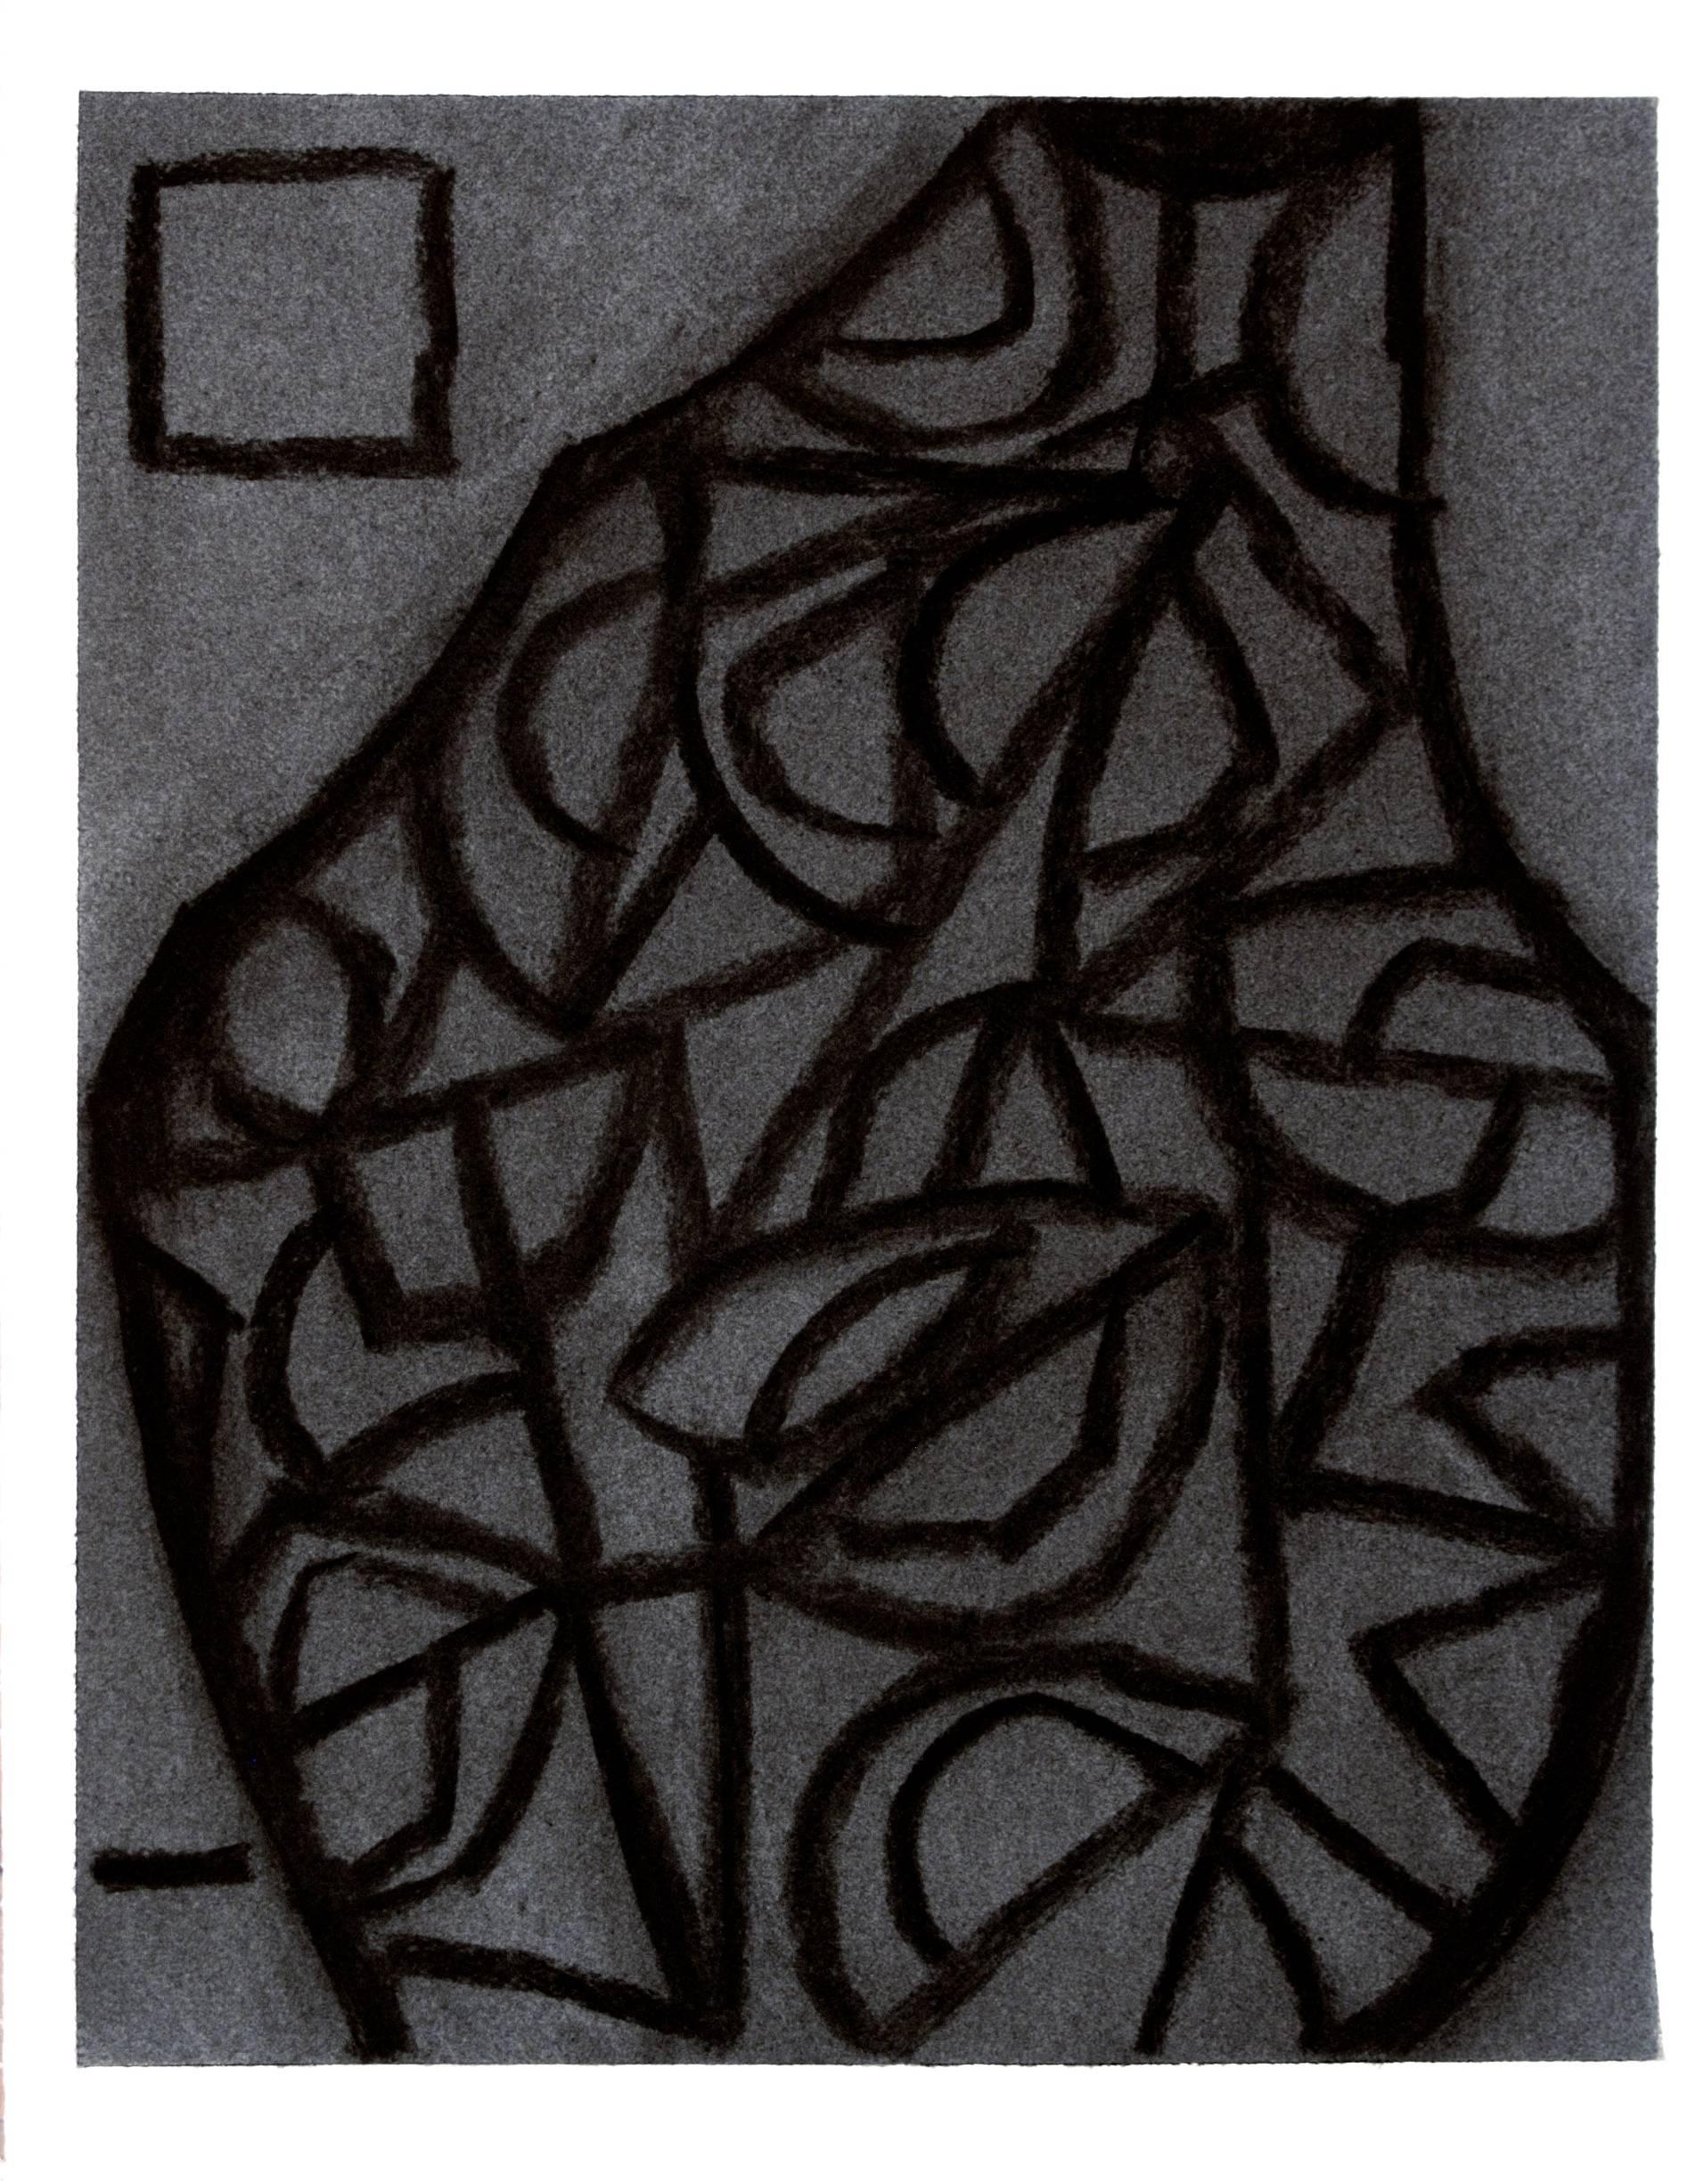 Untitled 1 (Modern Black Charcoal & Gray Abstract Still Life Drawing on Paper)